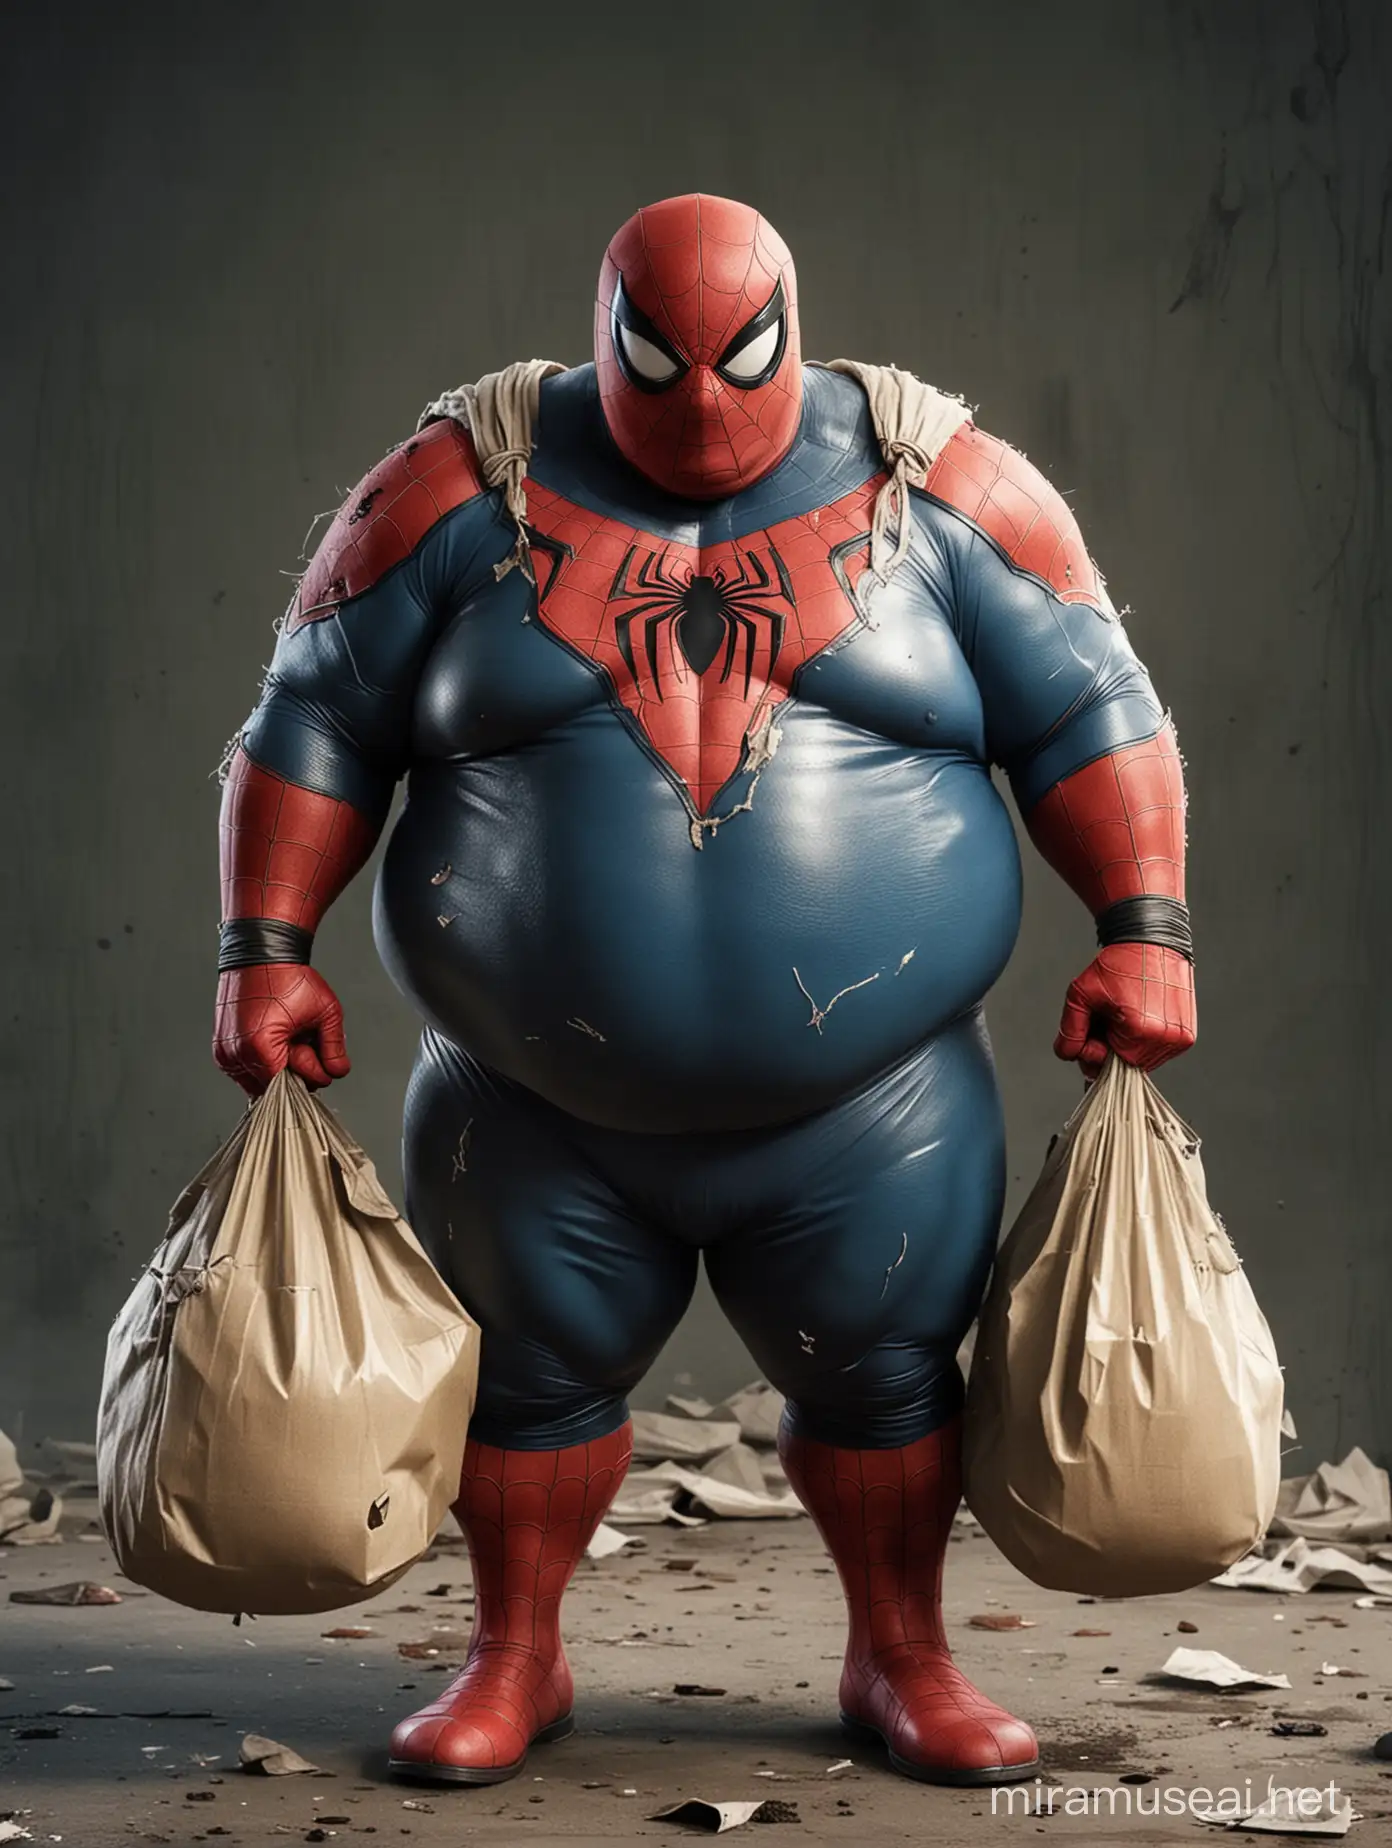 Overweight SpiderMan Carrying Bags in Tattered Suit